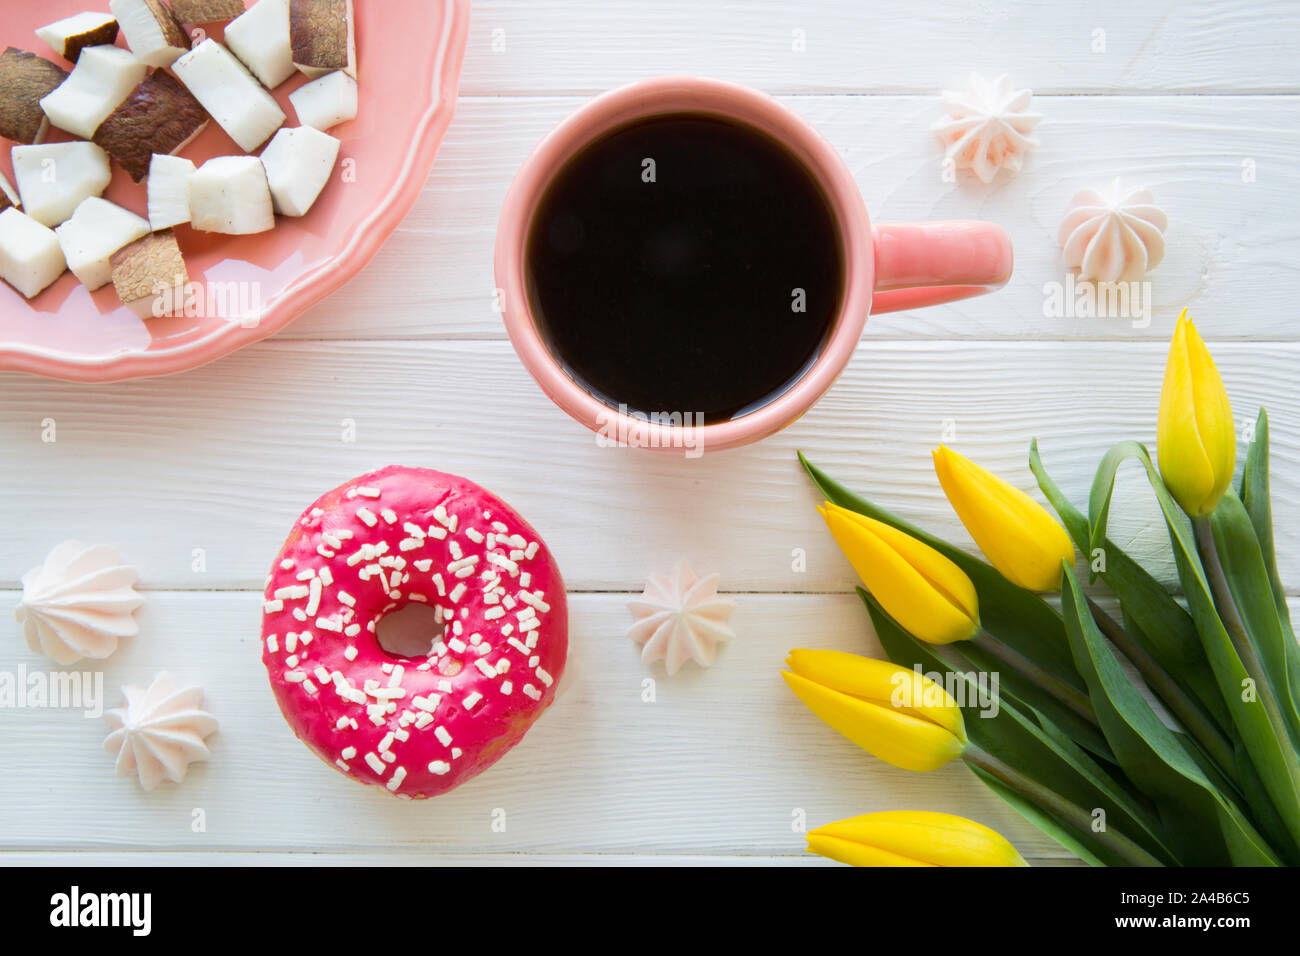 Sweet breakfast. Pieces of coconut, morning black coffee and pink glazed doughnut. Yeelow tulip decoration on white wooden background. Stock Photo